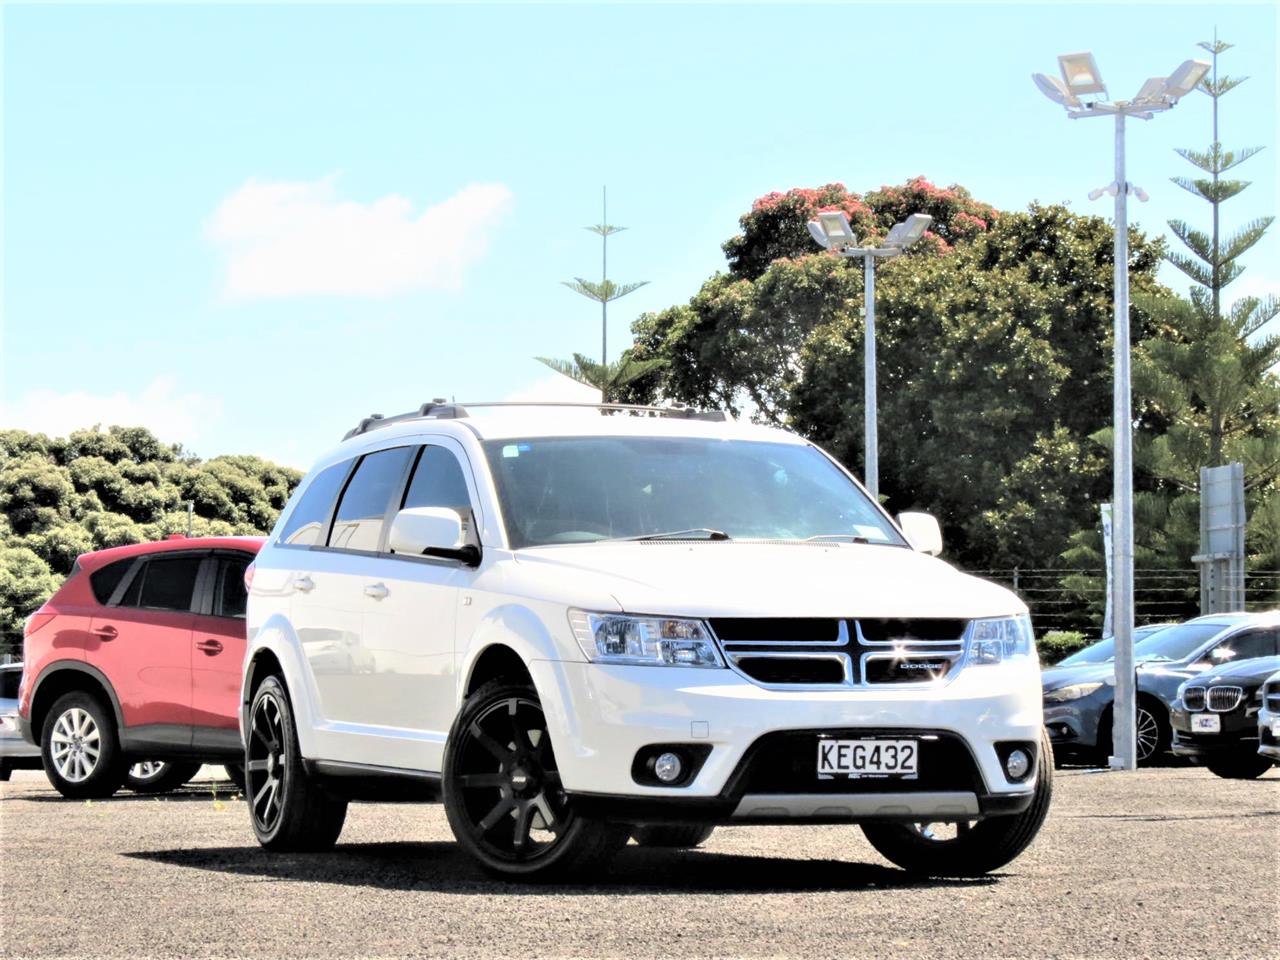 NZC 2016 Dodge Journey  just arrived to Auckland